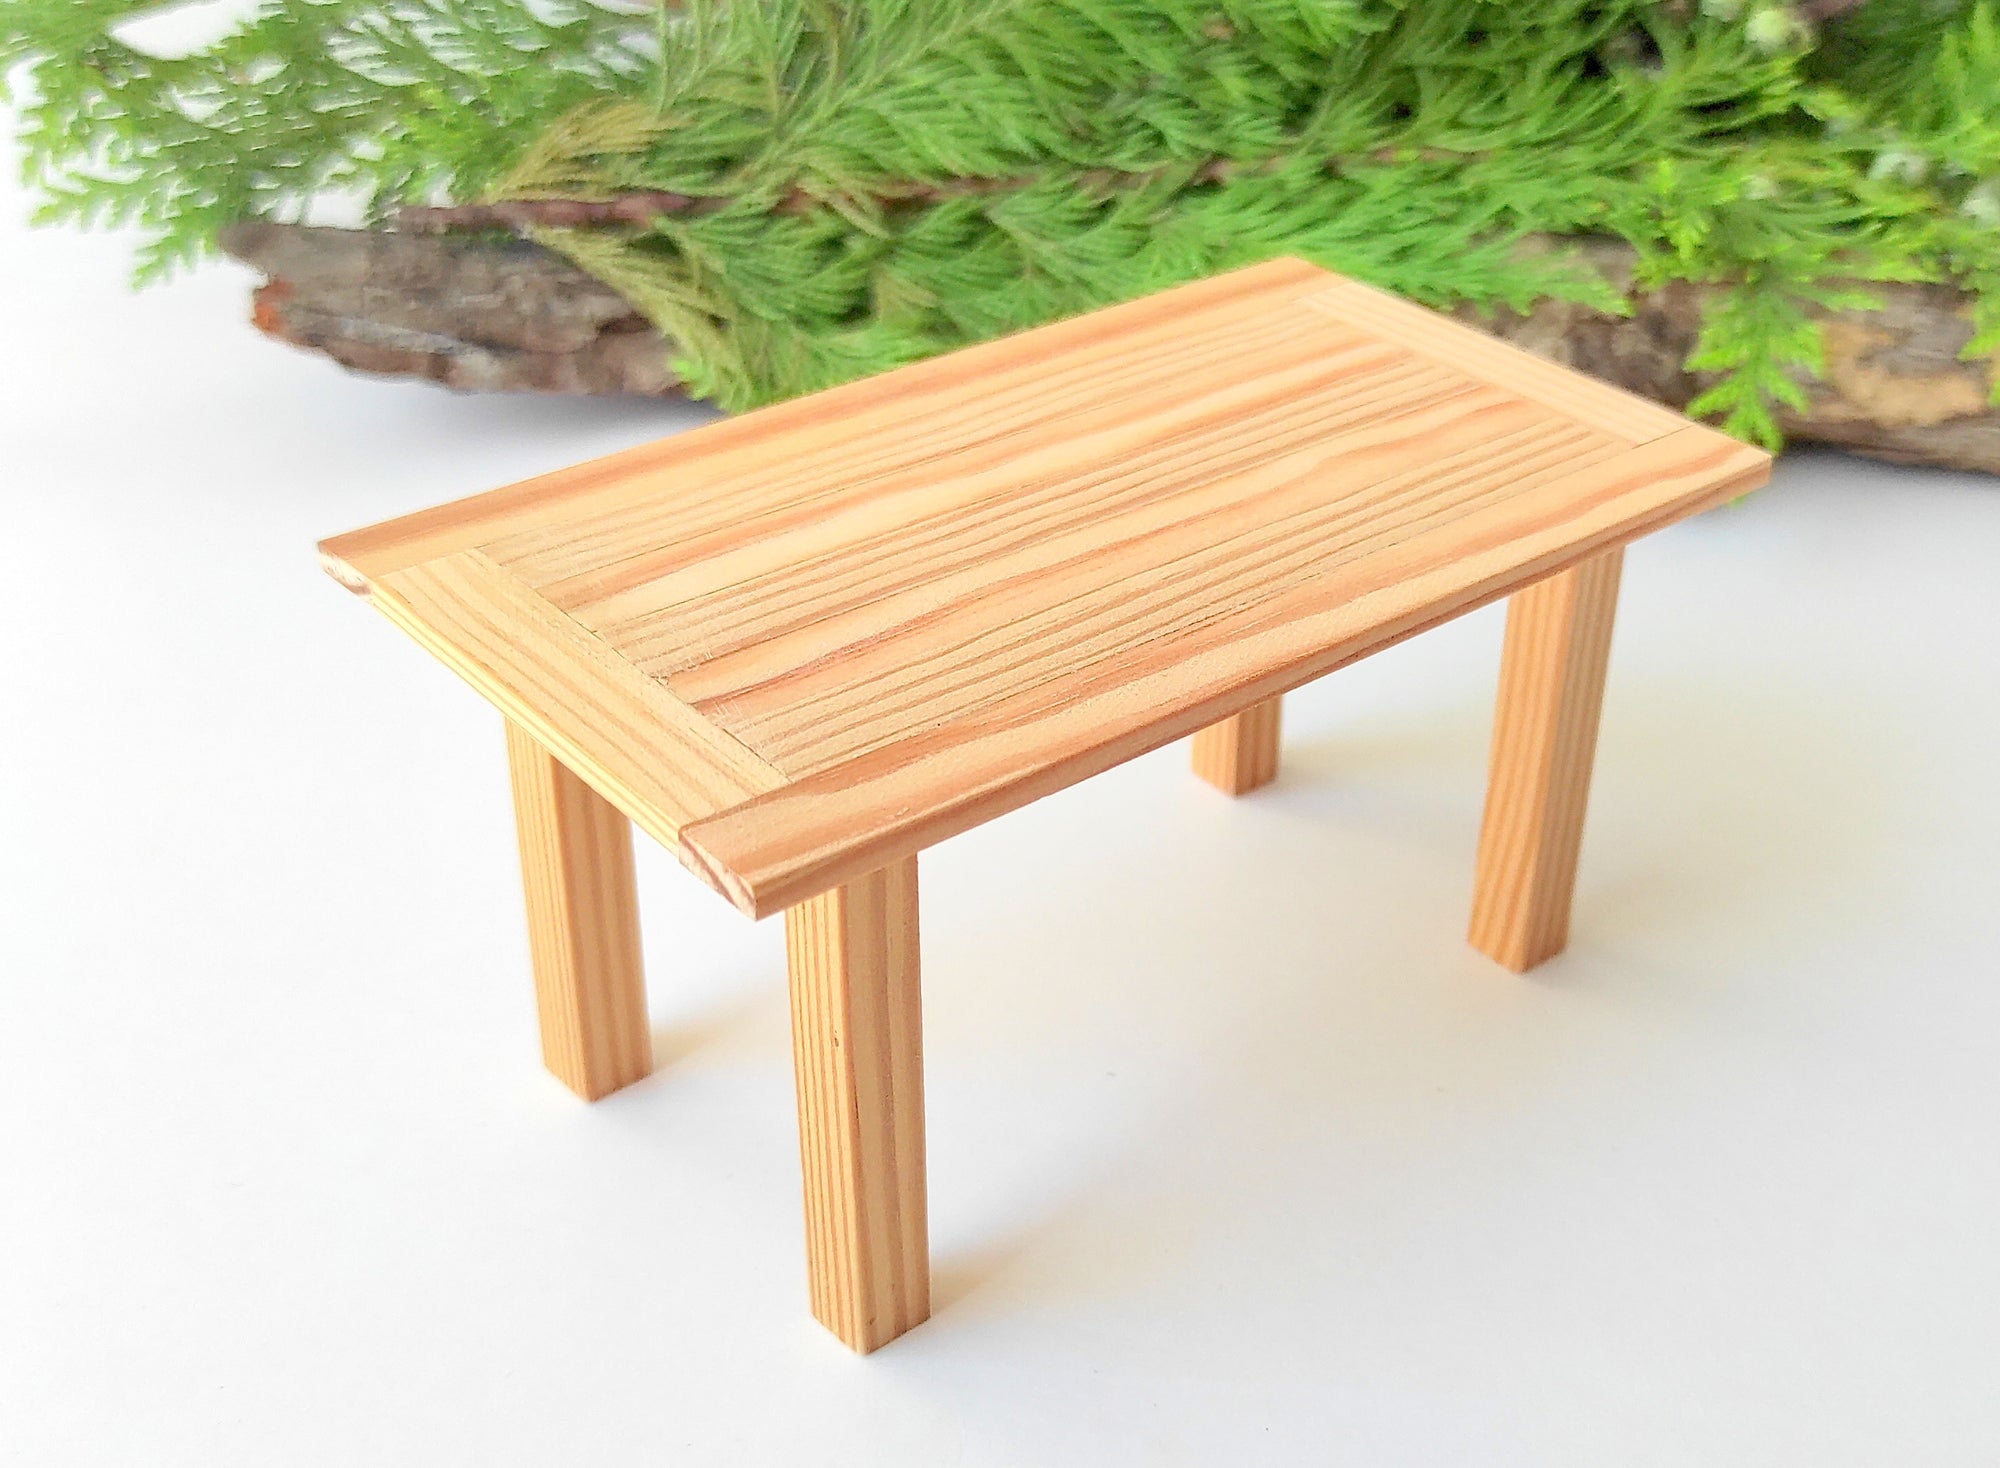 Miniature wooden dining/kitchen table- rustic table of real pine wood- dollhouse furniture fairy desk table- 1/12th scale dollhouse- fairy garden decor